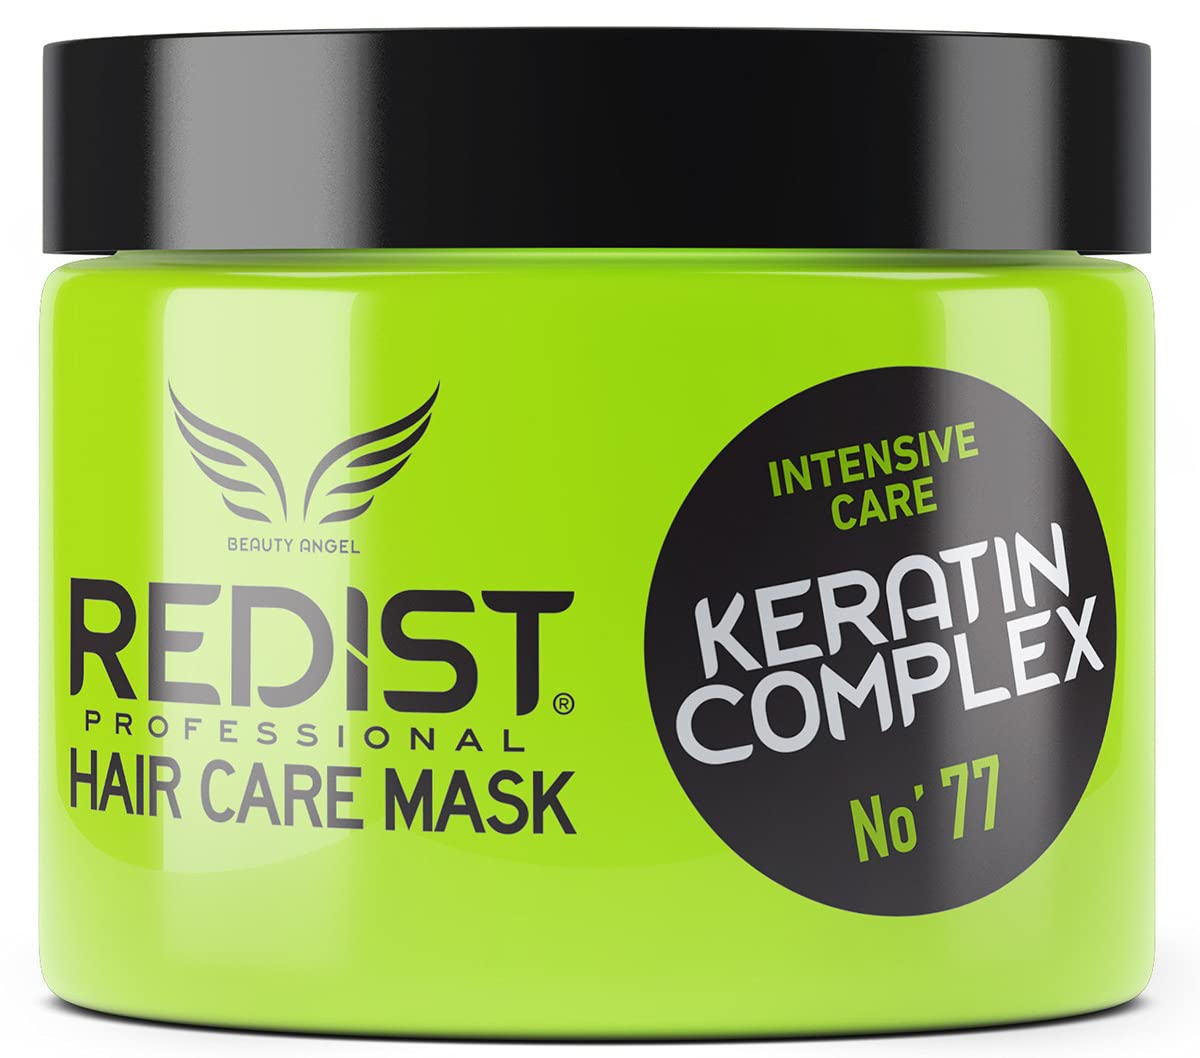 Redist Keratin Hair Care Mask, 500 ml, Hair Mask with Keratin, Intensive Repairing Hair Treatment, Moisturises without Weight, Brittle, Dry, Damaged Hair, Intensive Care